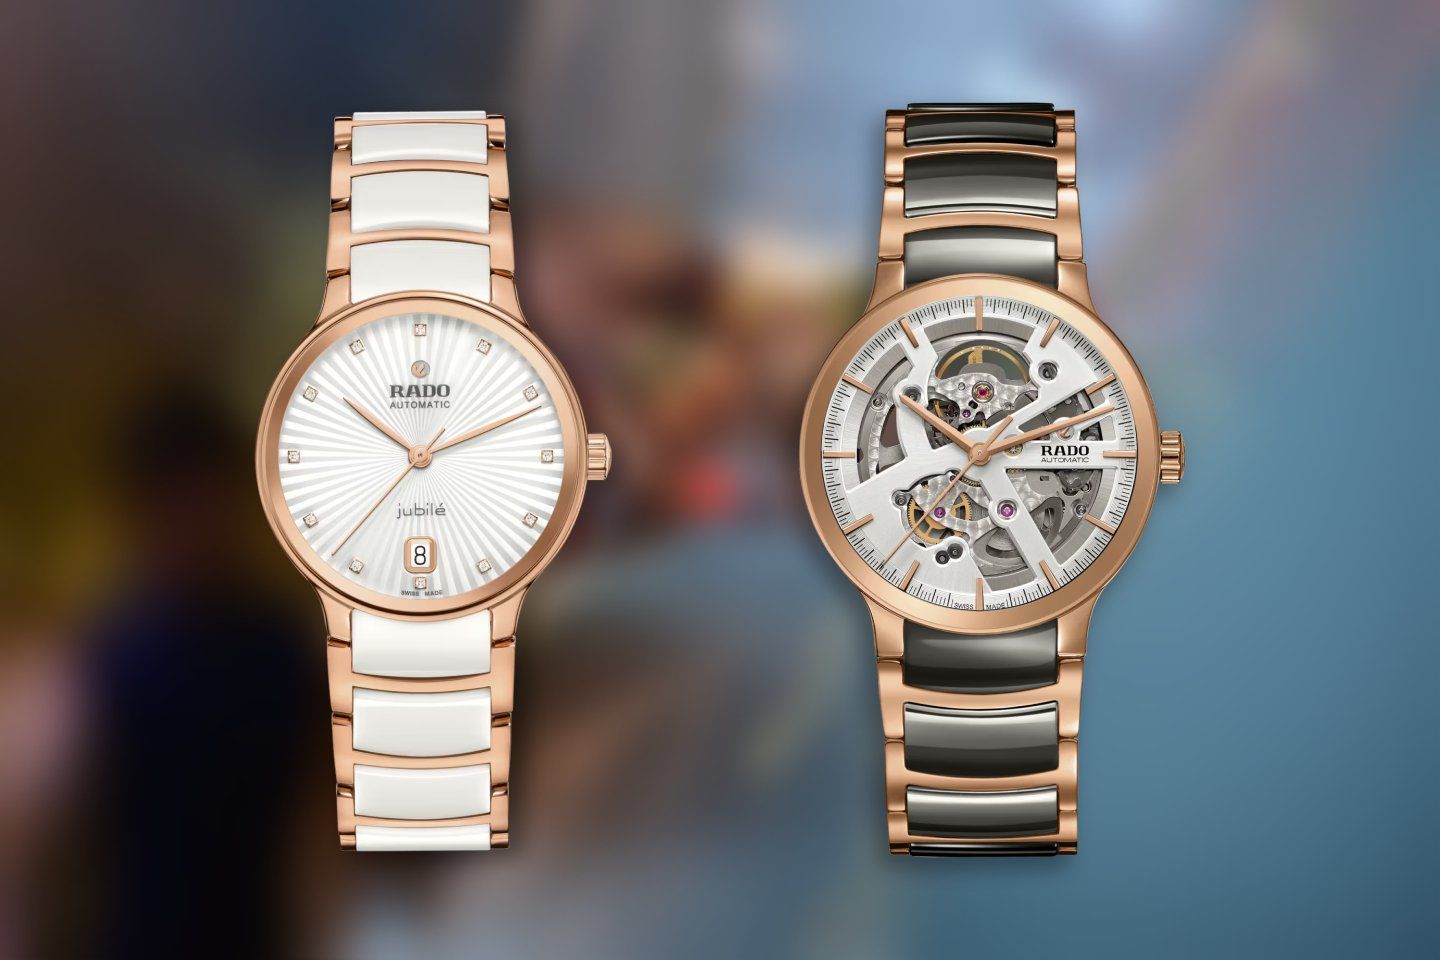 5 Timepieces That’ll Make Meaningful Gifts This Wedding Season